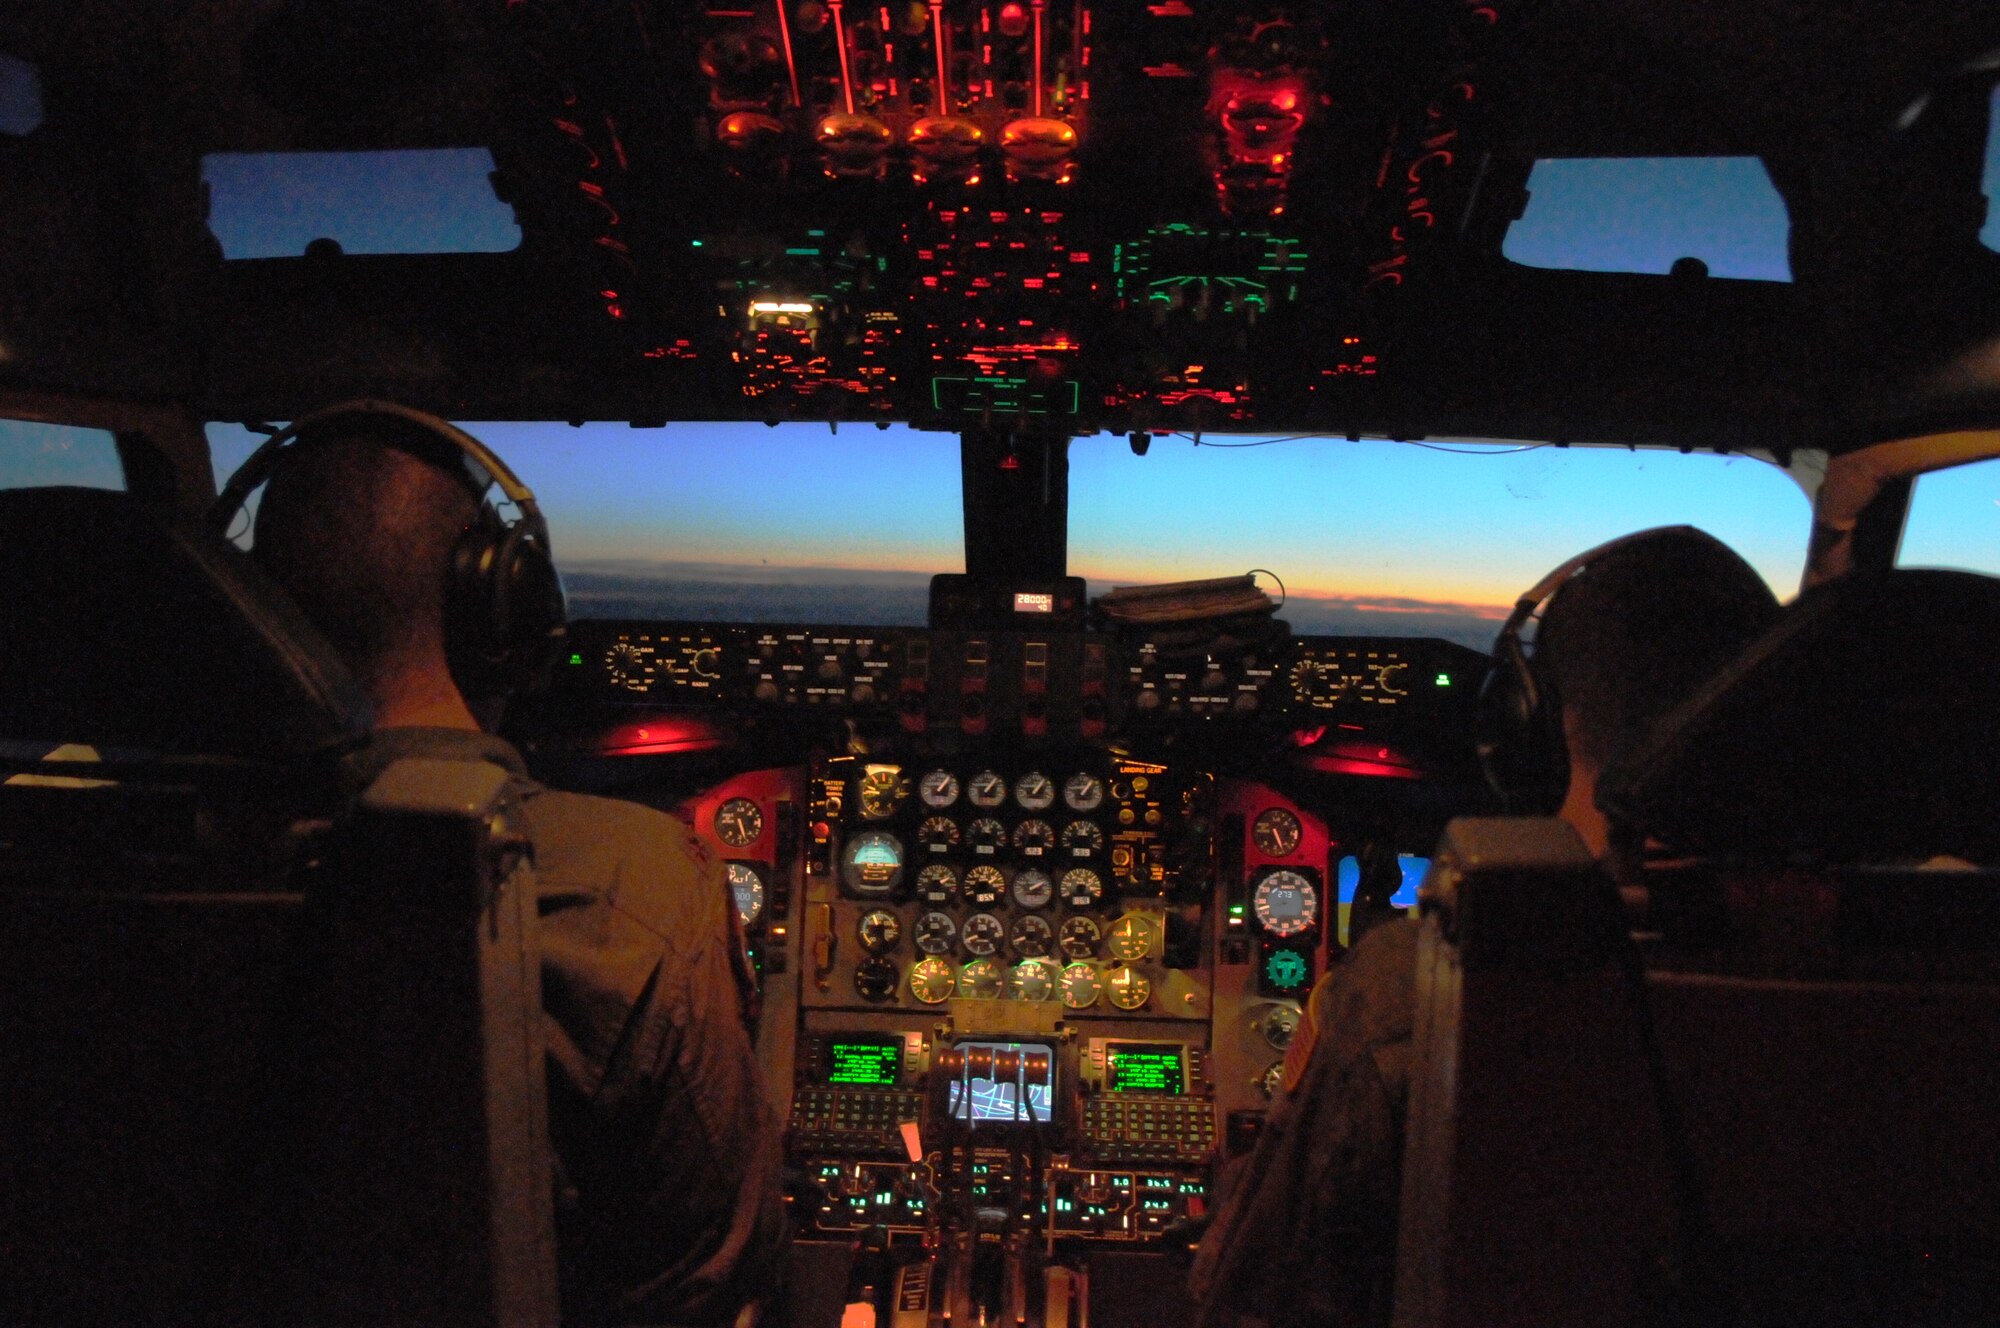 Maj. Jeremy Morrison and Maj. Zachery Love, pilots with the 191st Air Refueling Squadron, fly a KC-135R Stratotanker during a night training exercise over Germany in May 2014. (Utah Air National Guard photo by Staff Sgt. Annie Edwards/RELEASED)